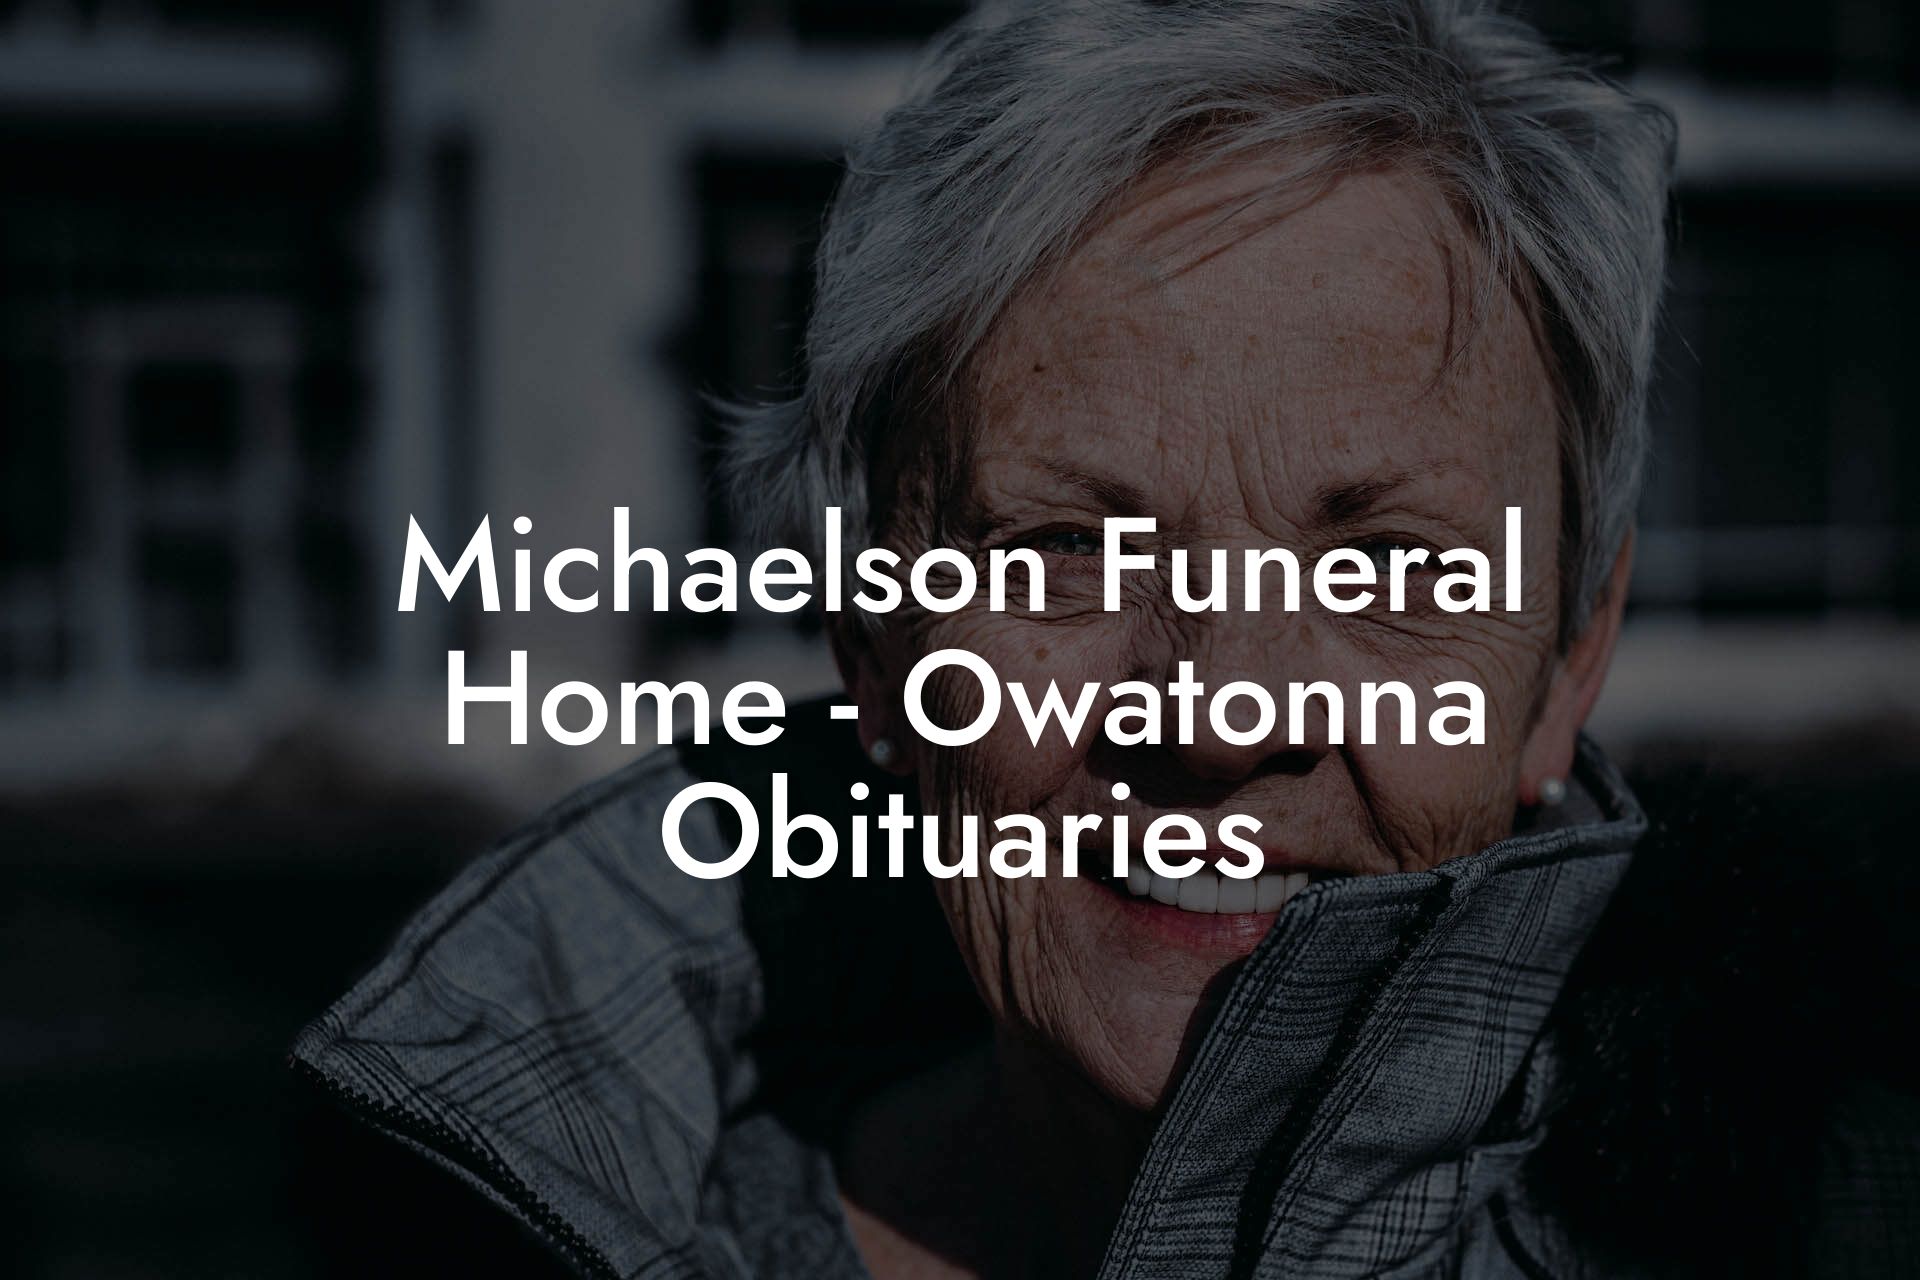 Michaelson Funeral Home - Owatonna Obituaries